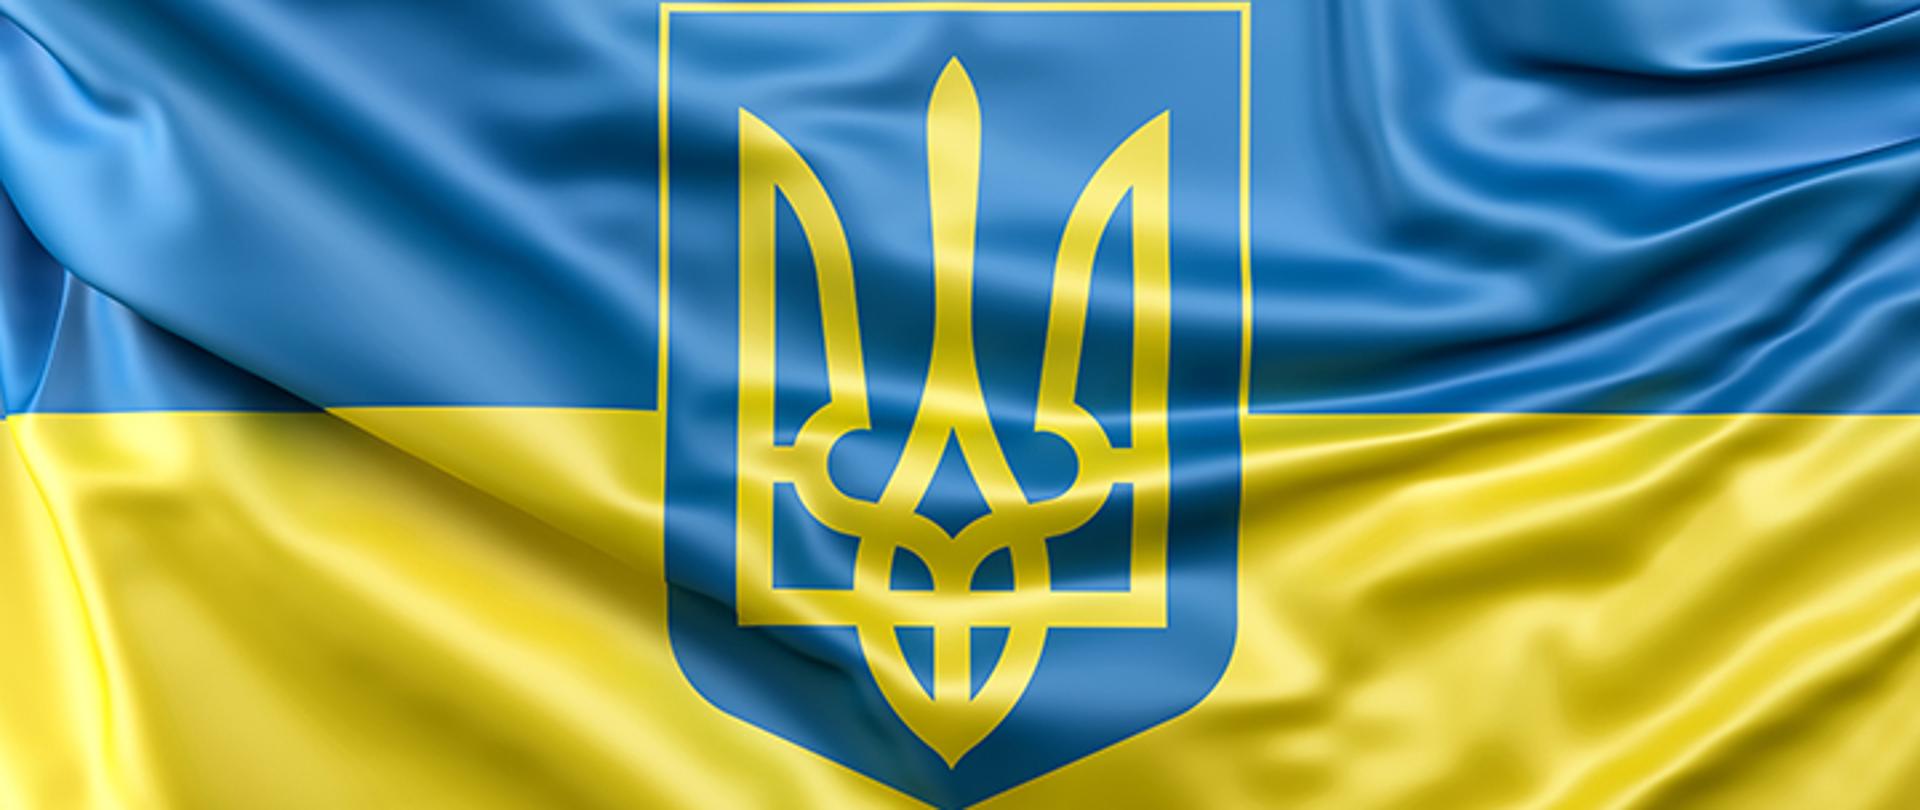 Flag of Ukraine with coat of arms